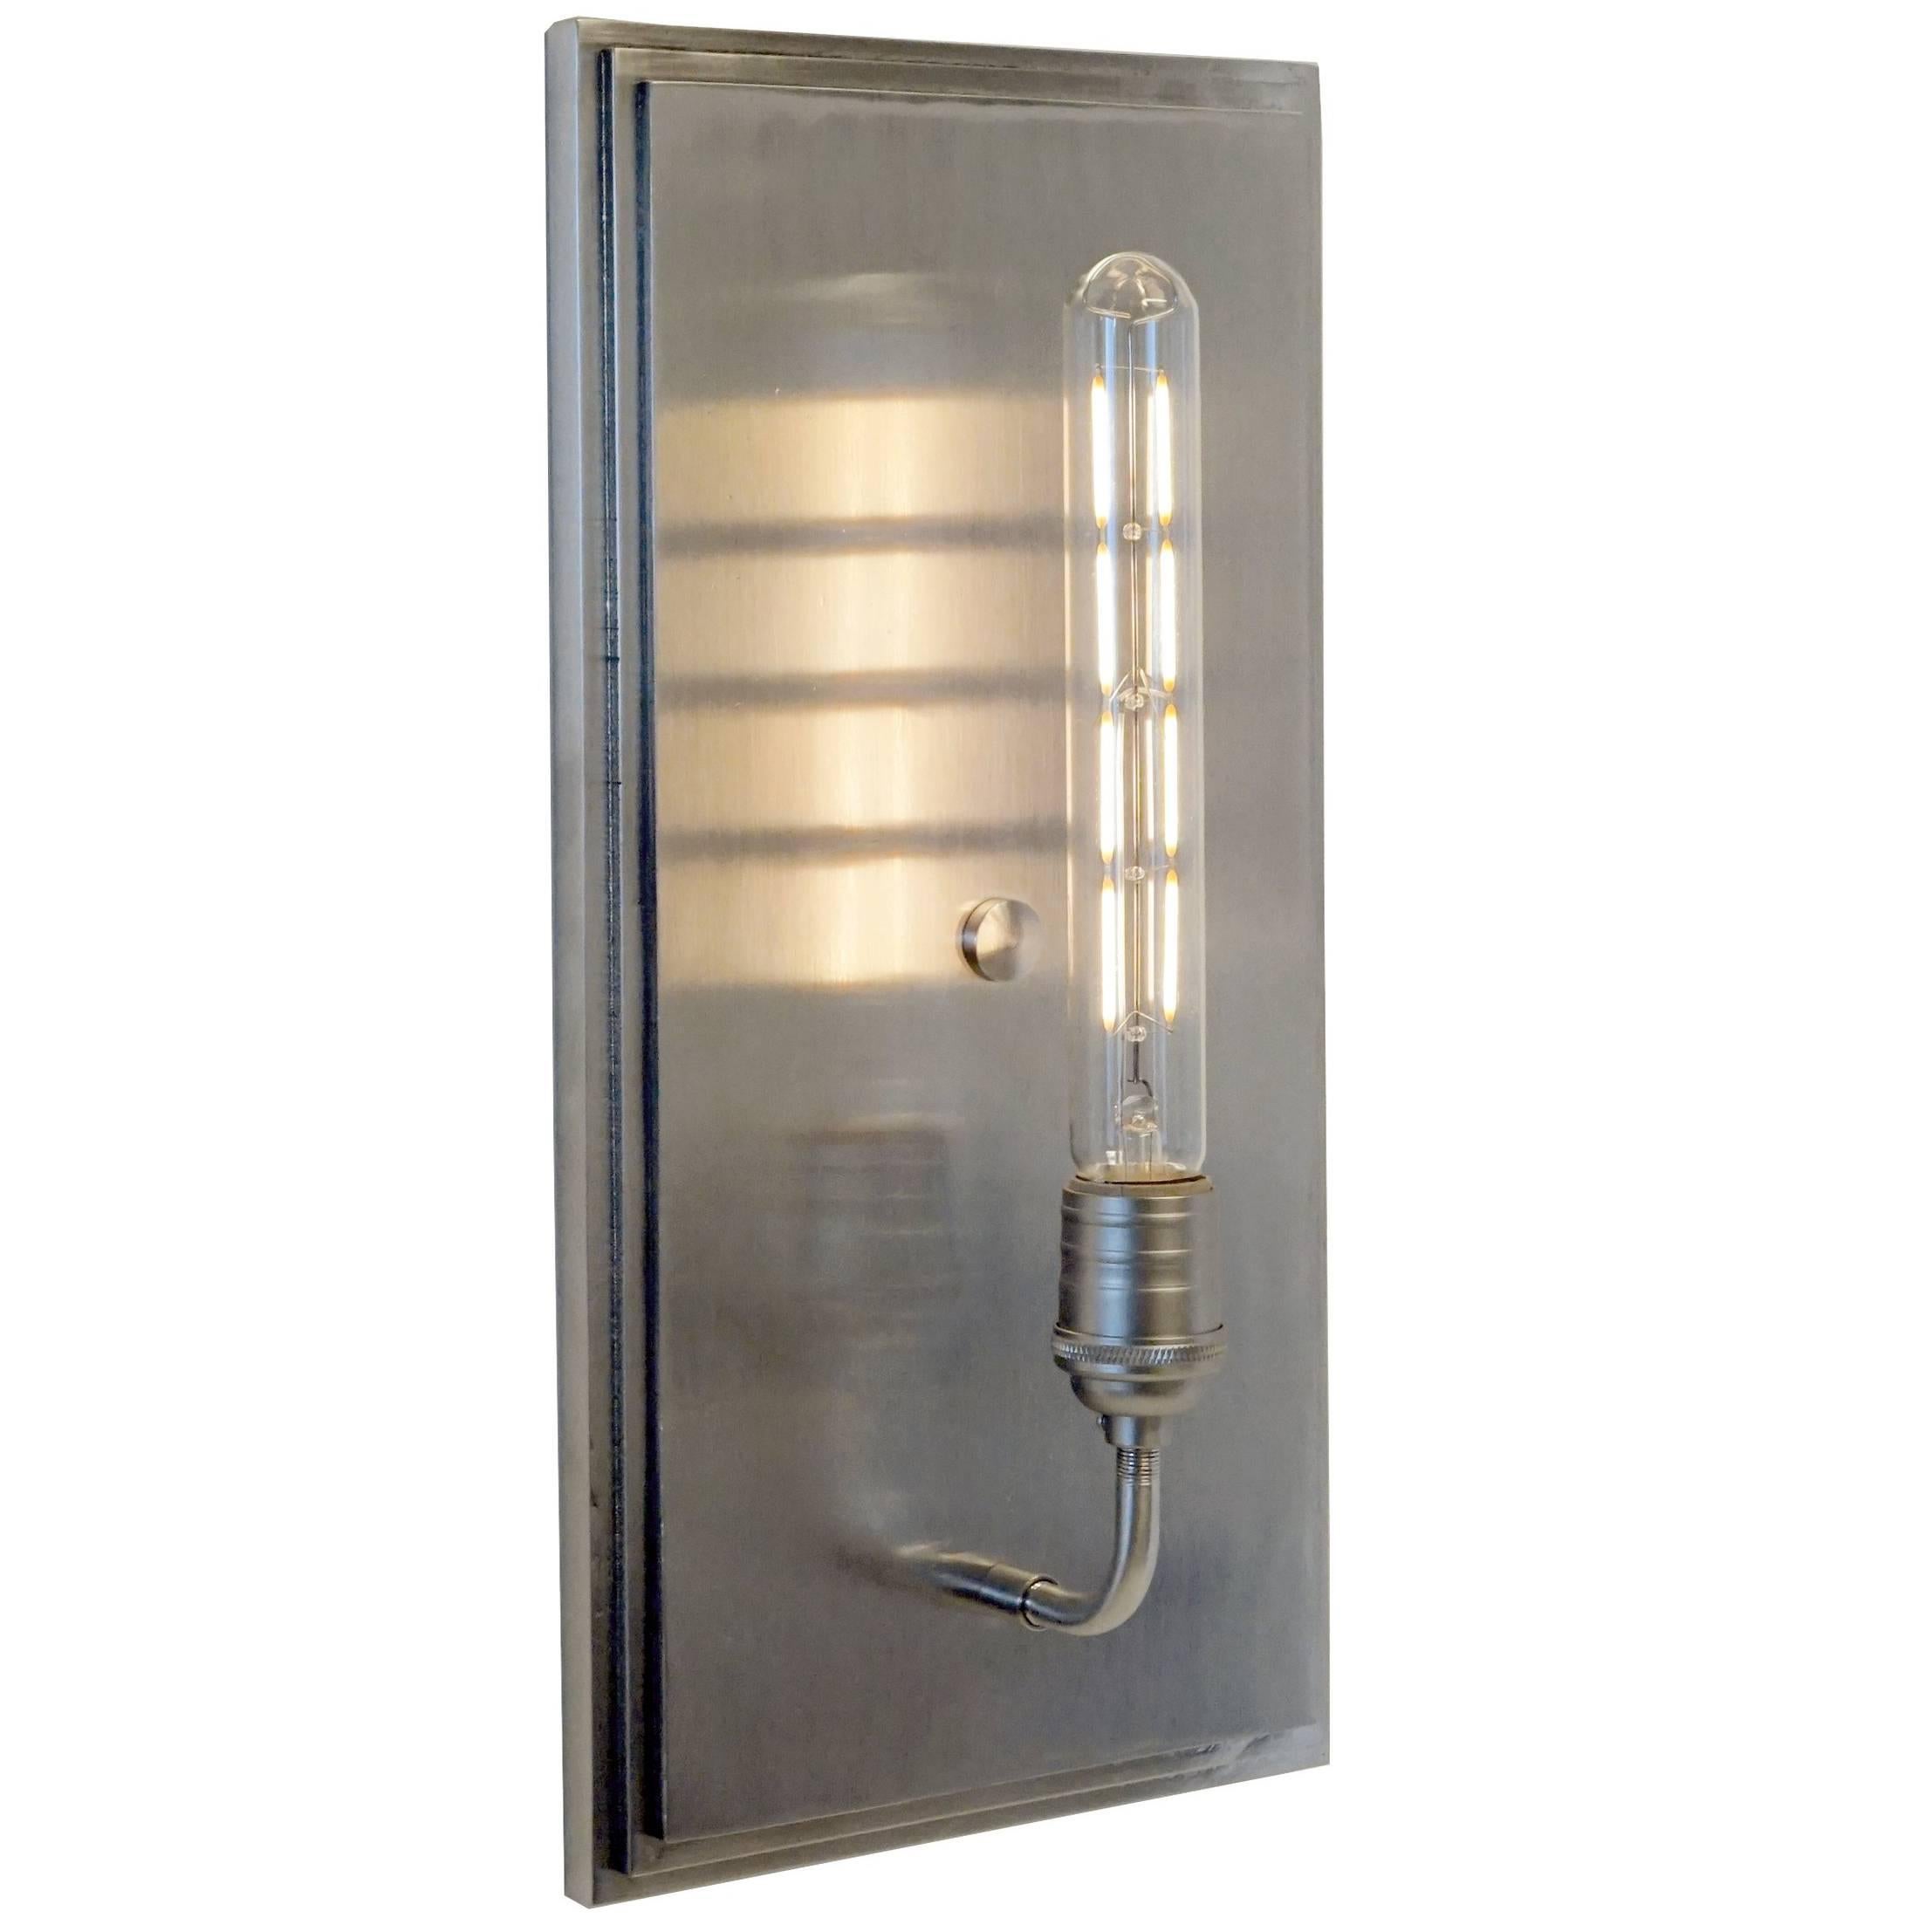 Contemporary, Minimal Interior Flat Wall Sconce Lantern in Brushed Nickel